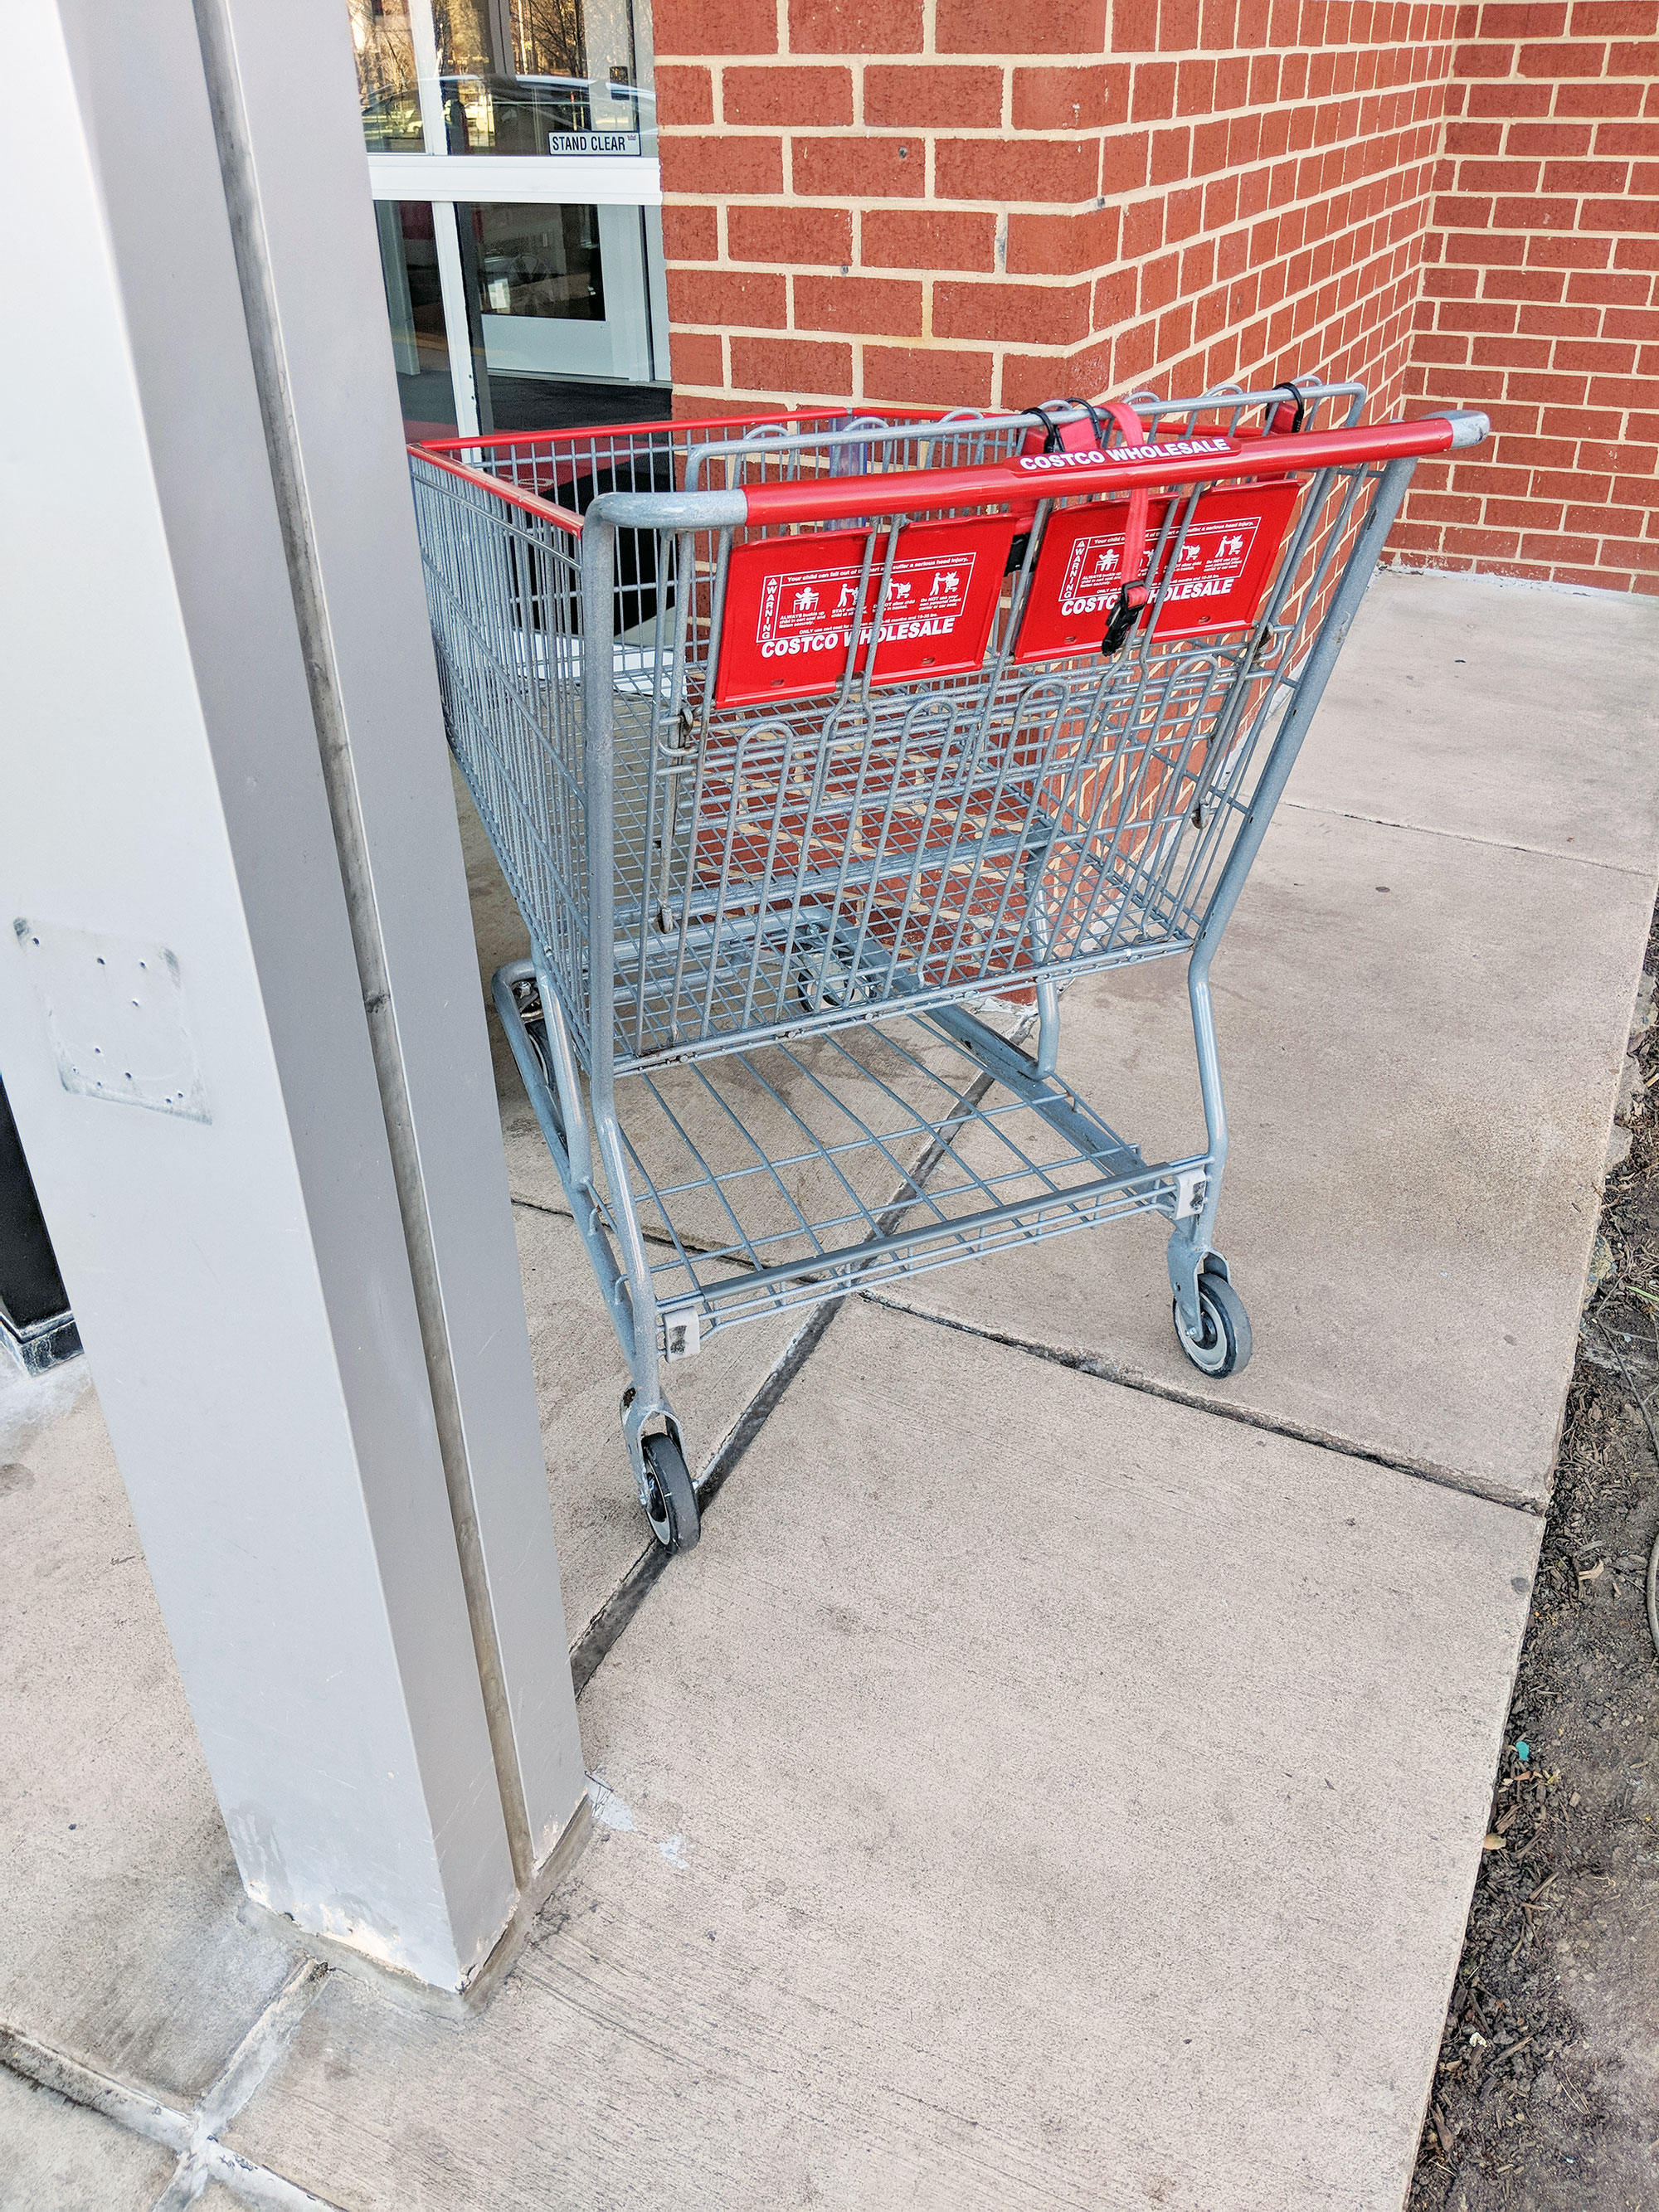 Costco carts are frequently strewn across Pentagon City - it's very common to find them in carts, sidewalks and in apartment buildings.